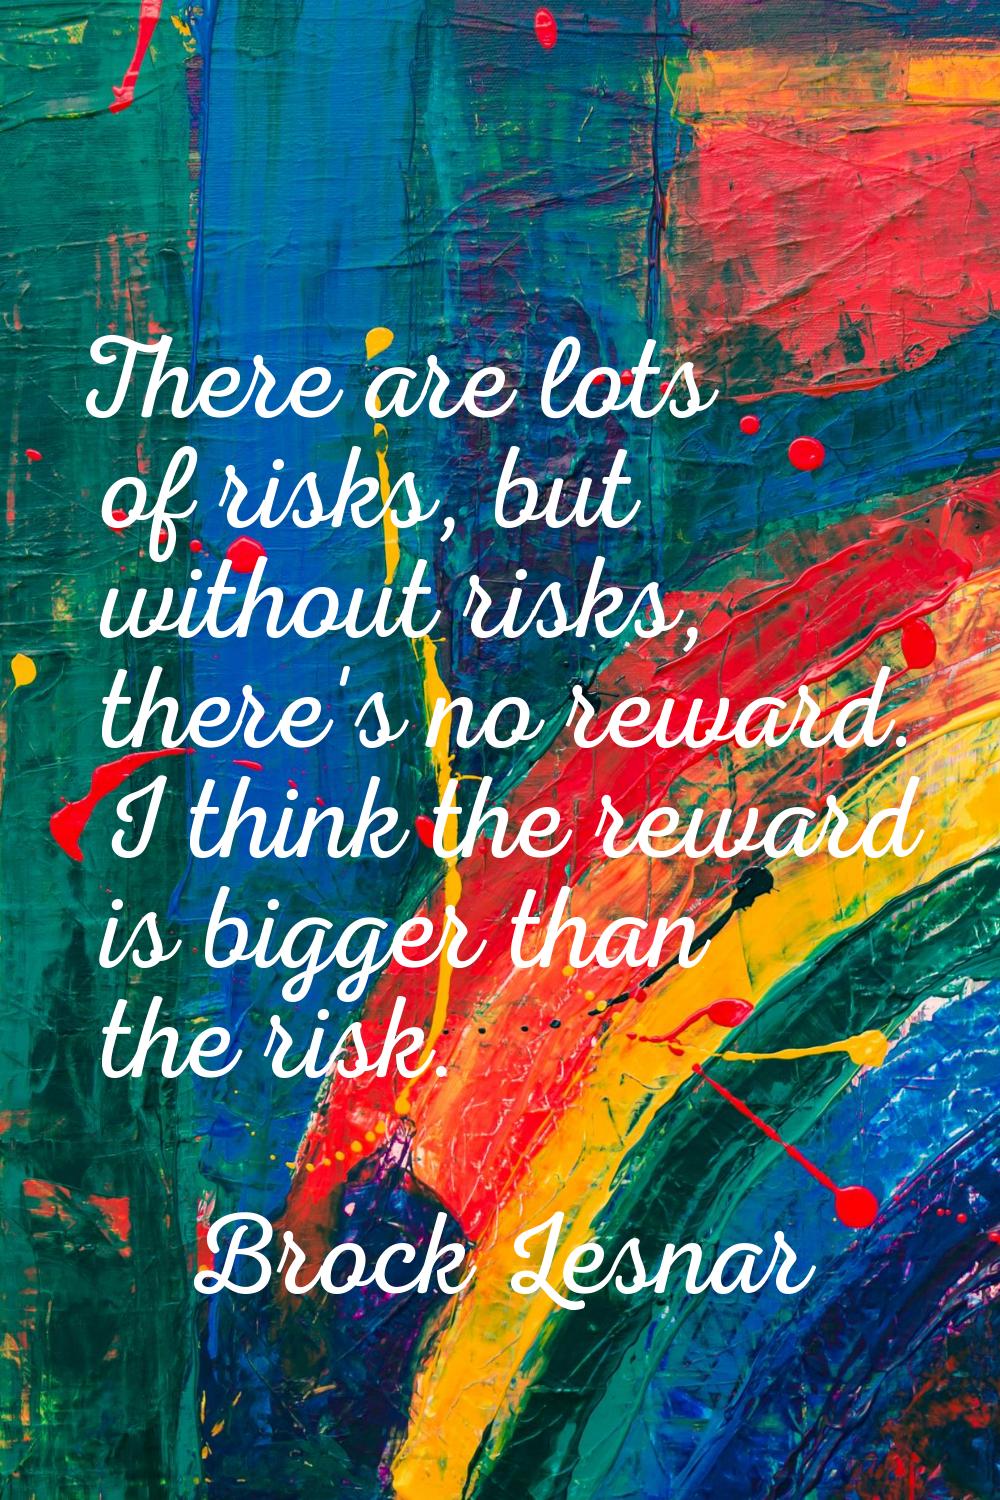 There are lots of risks, but without risks, there's no reward. I think the reward is bigger than th